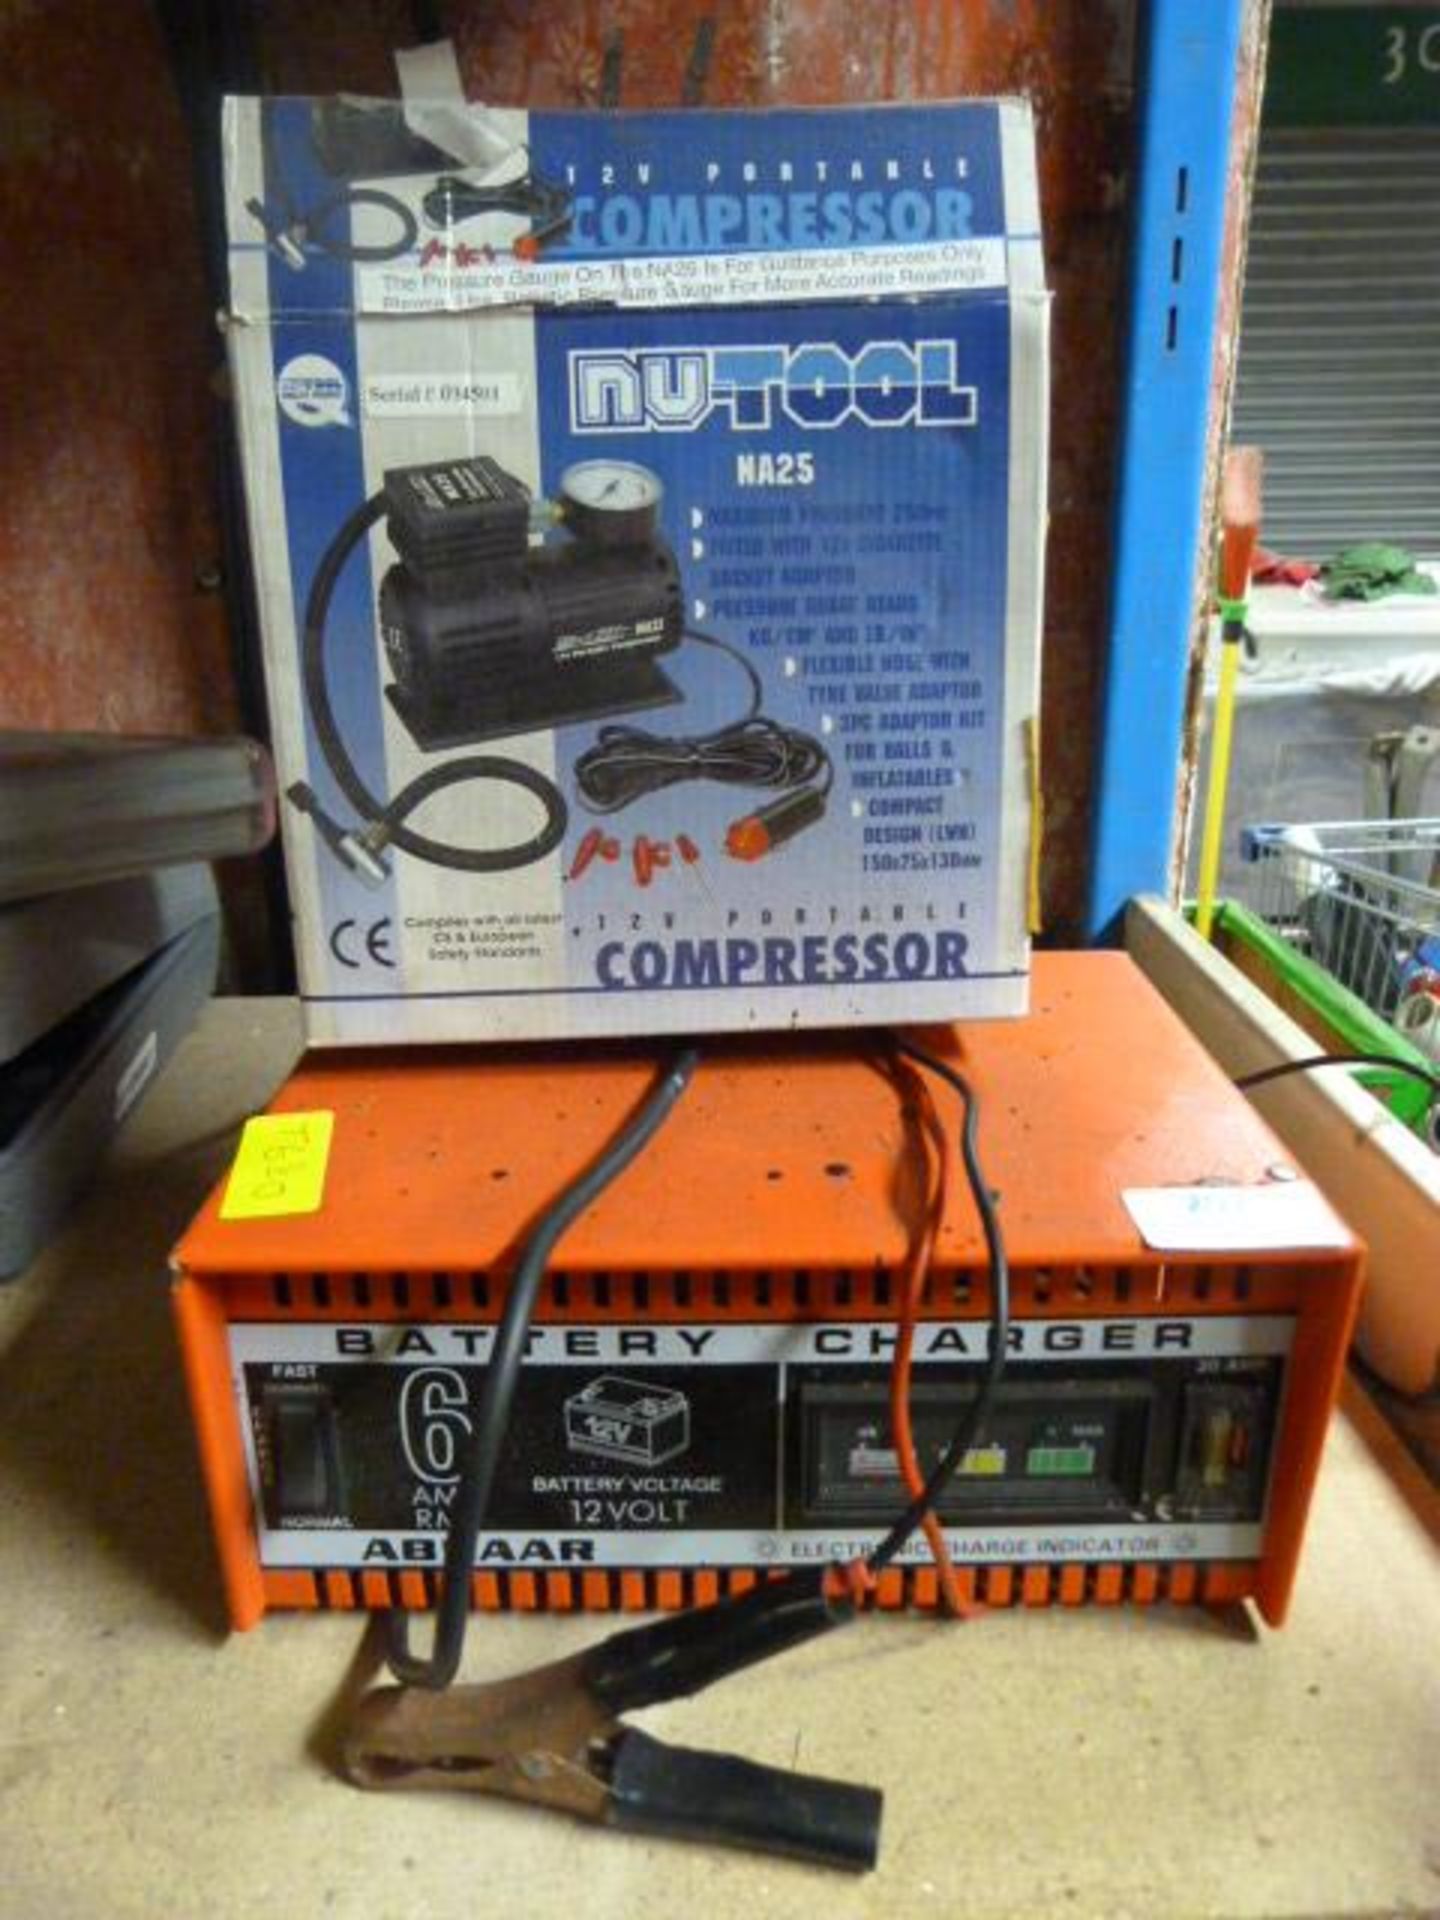 Mains Battery Charger and a 12v Compressor